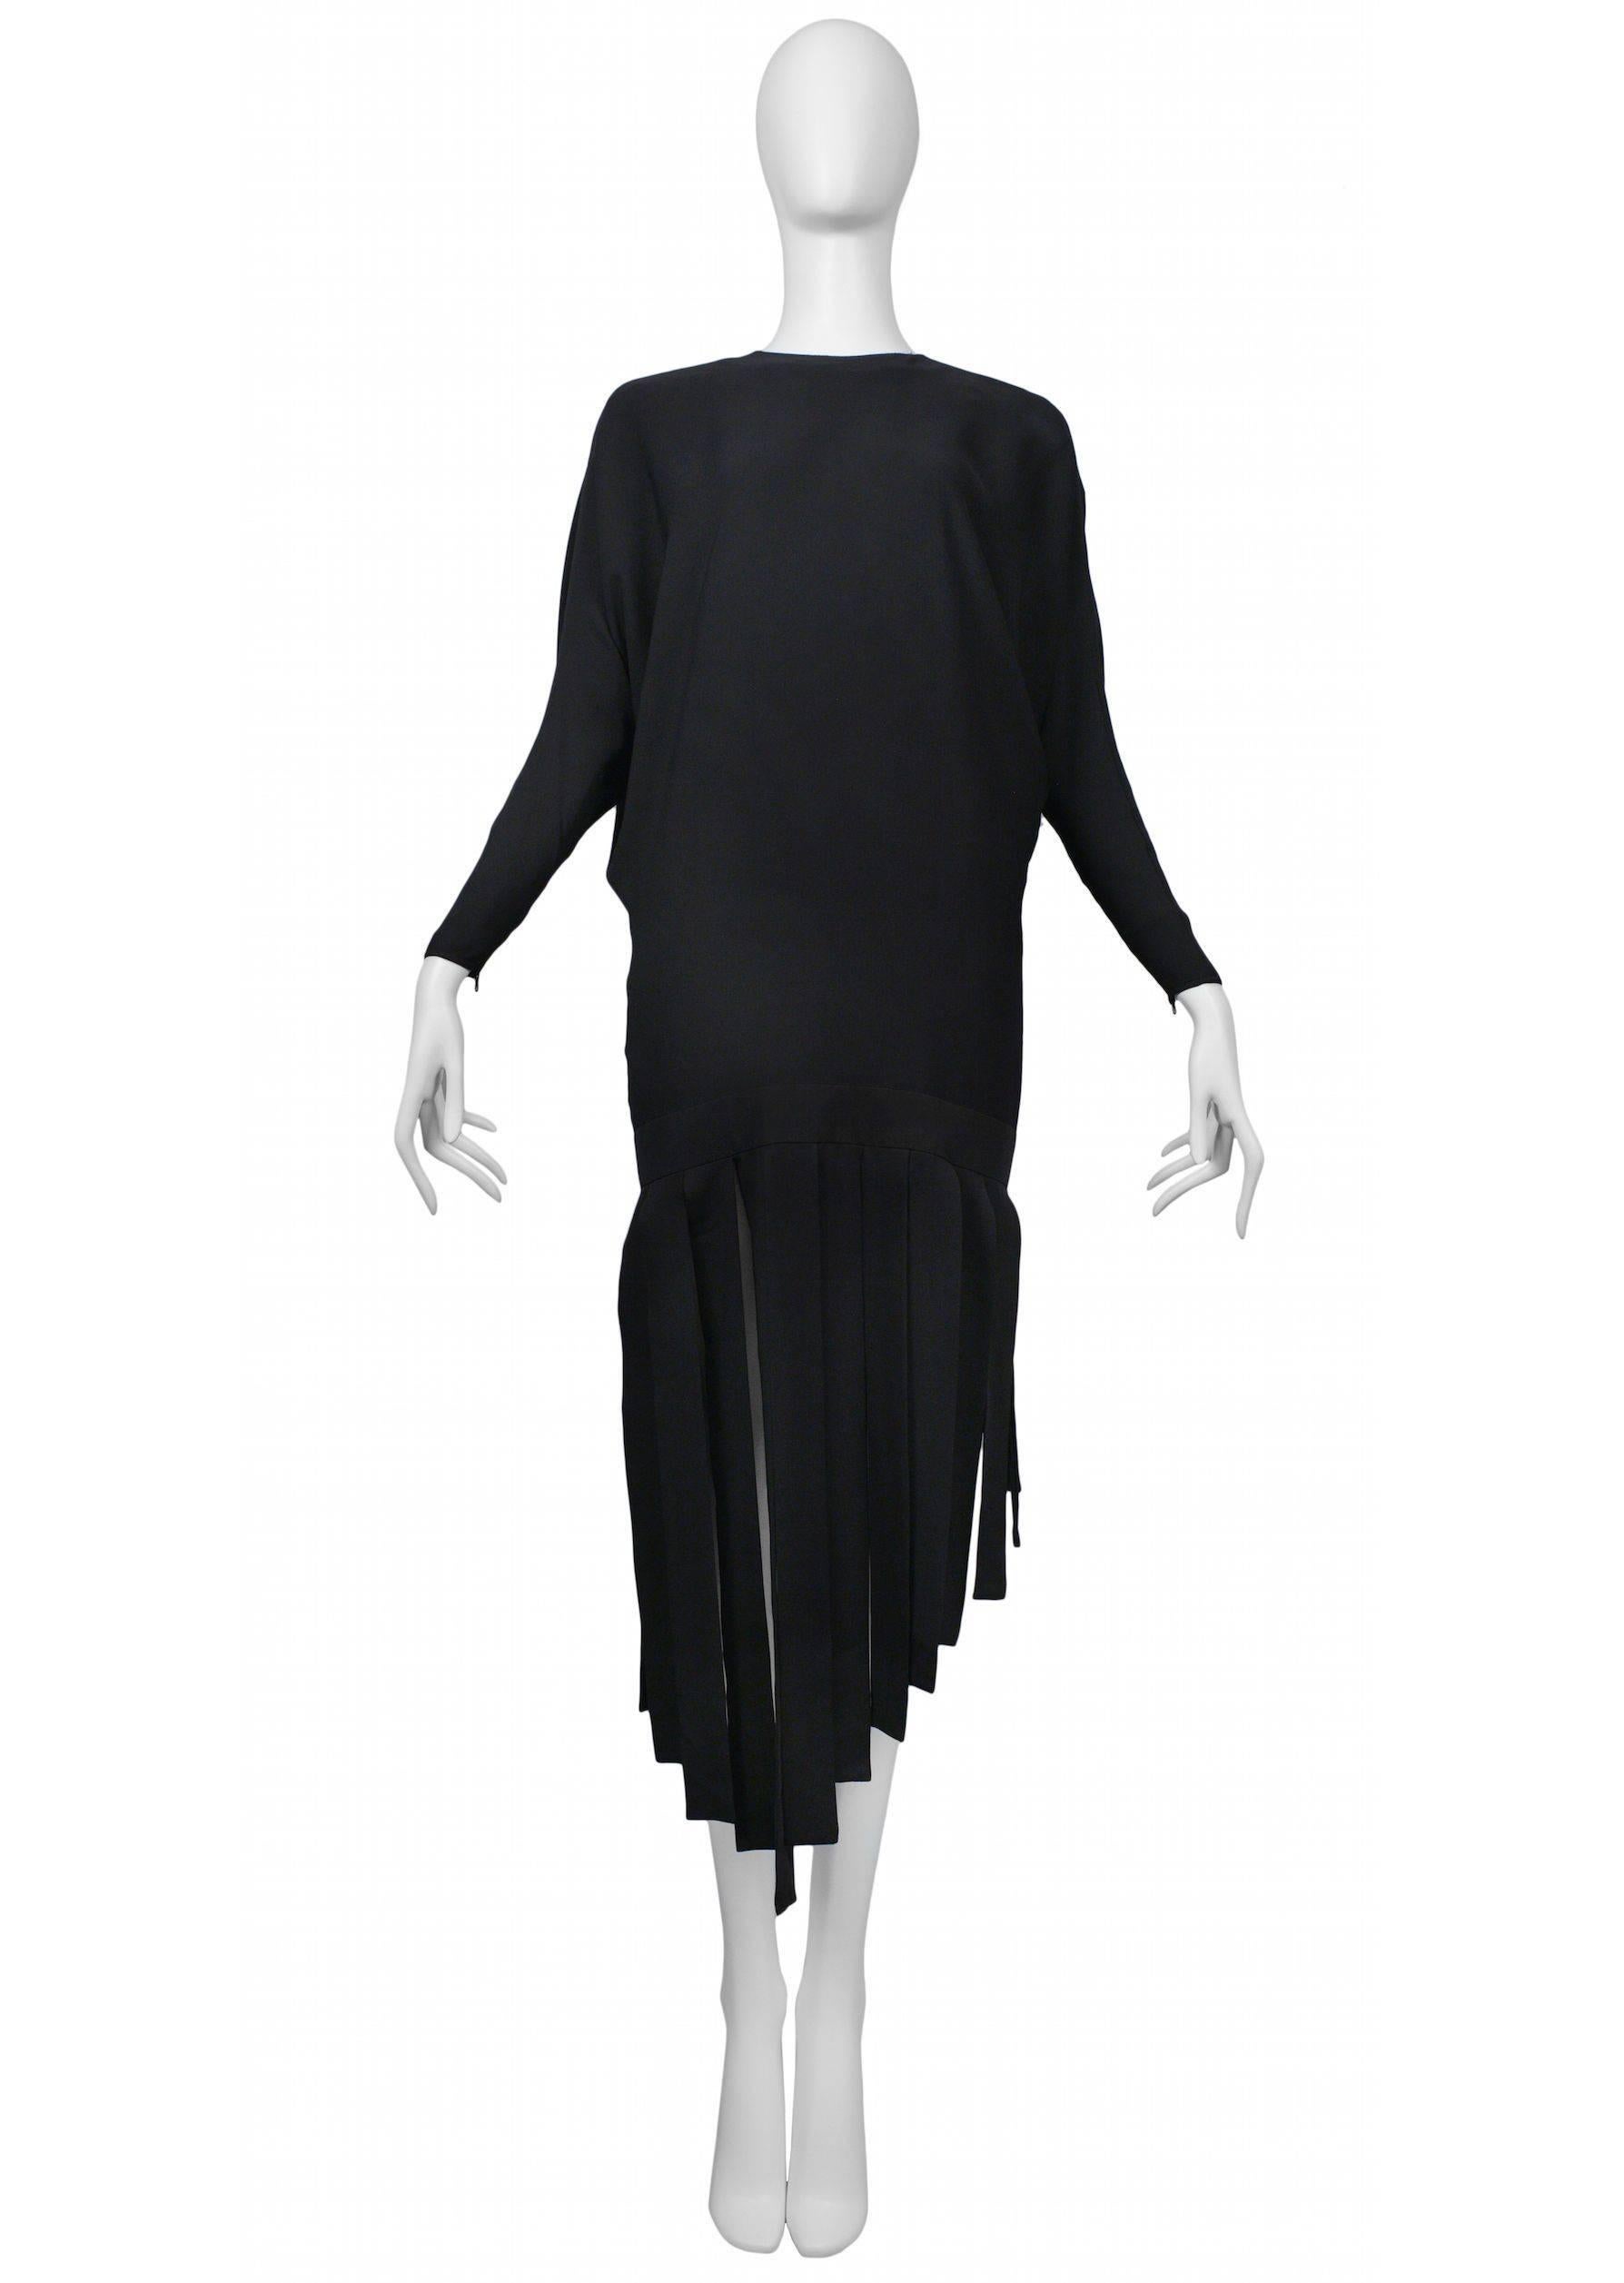 Pierre Cardin Couture dress features a drop waist and uneven hem. Based on famous 